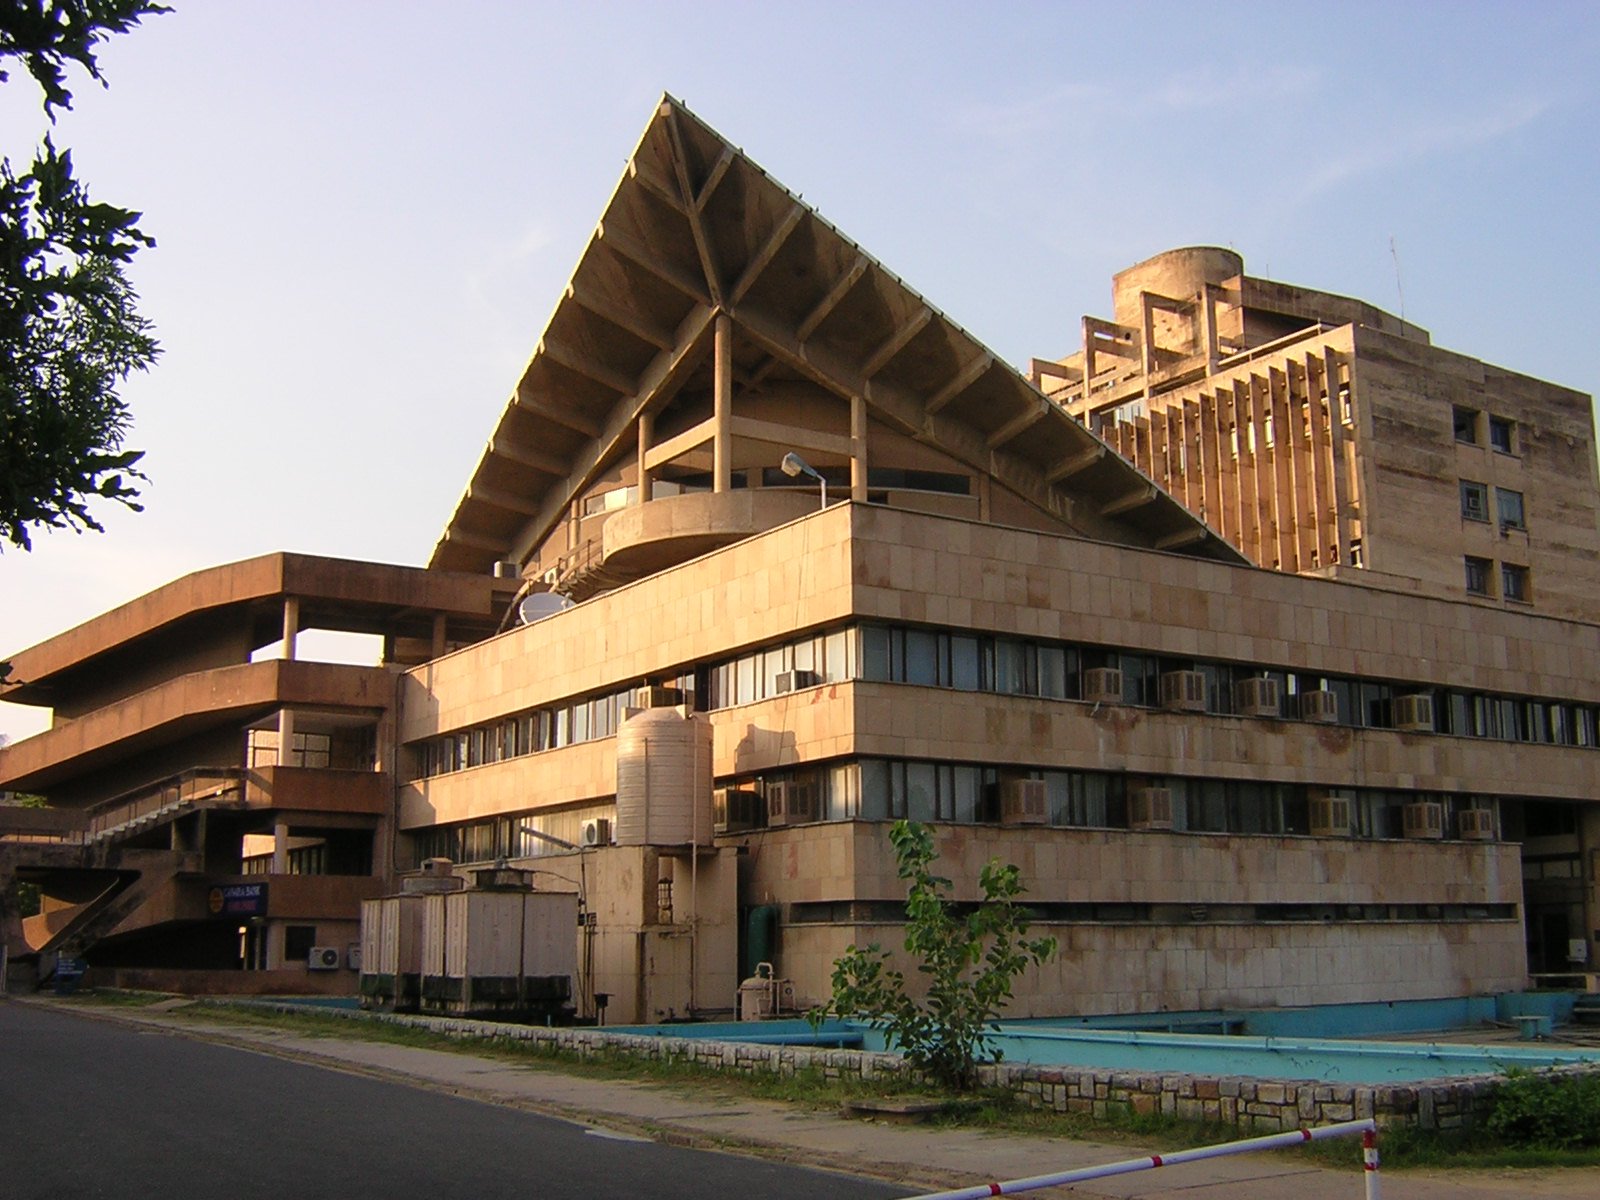 Education Ministry To Form A Sanskrit Panel In IITs To Explore Ancient Scientific Studies